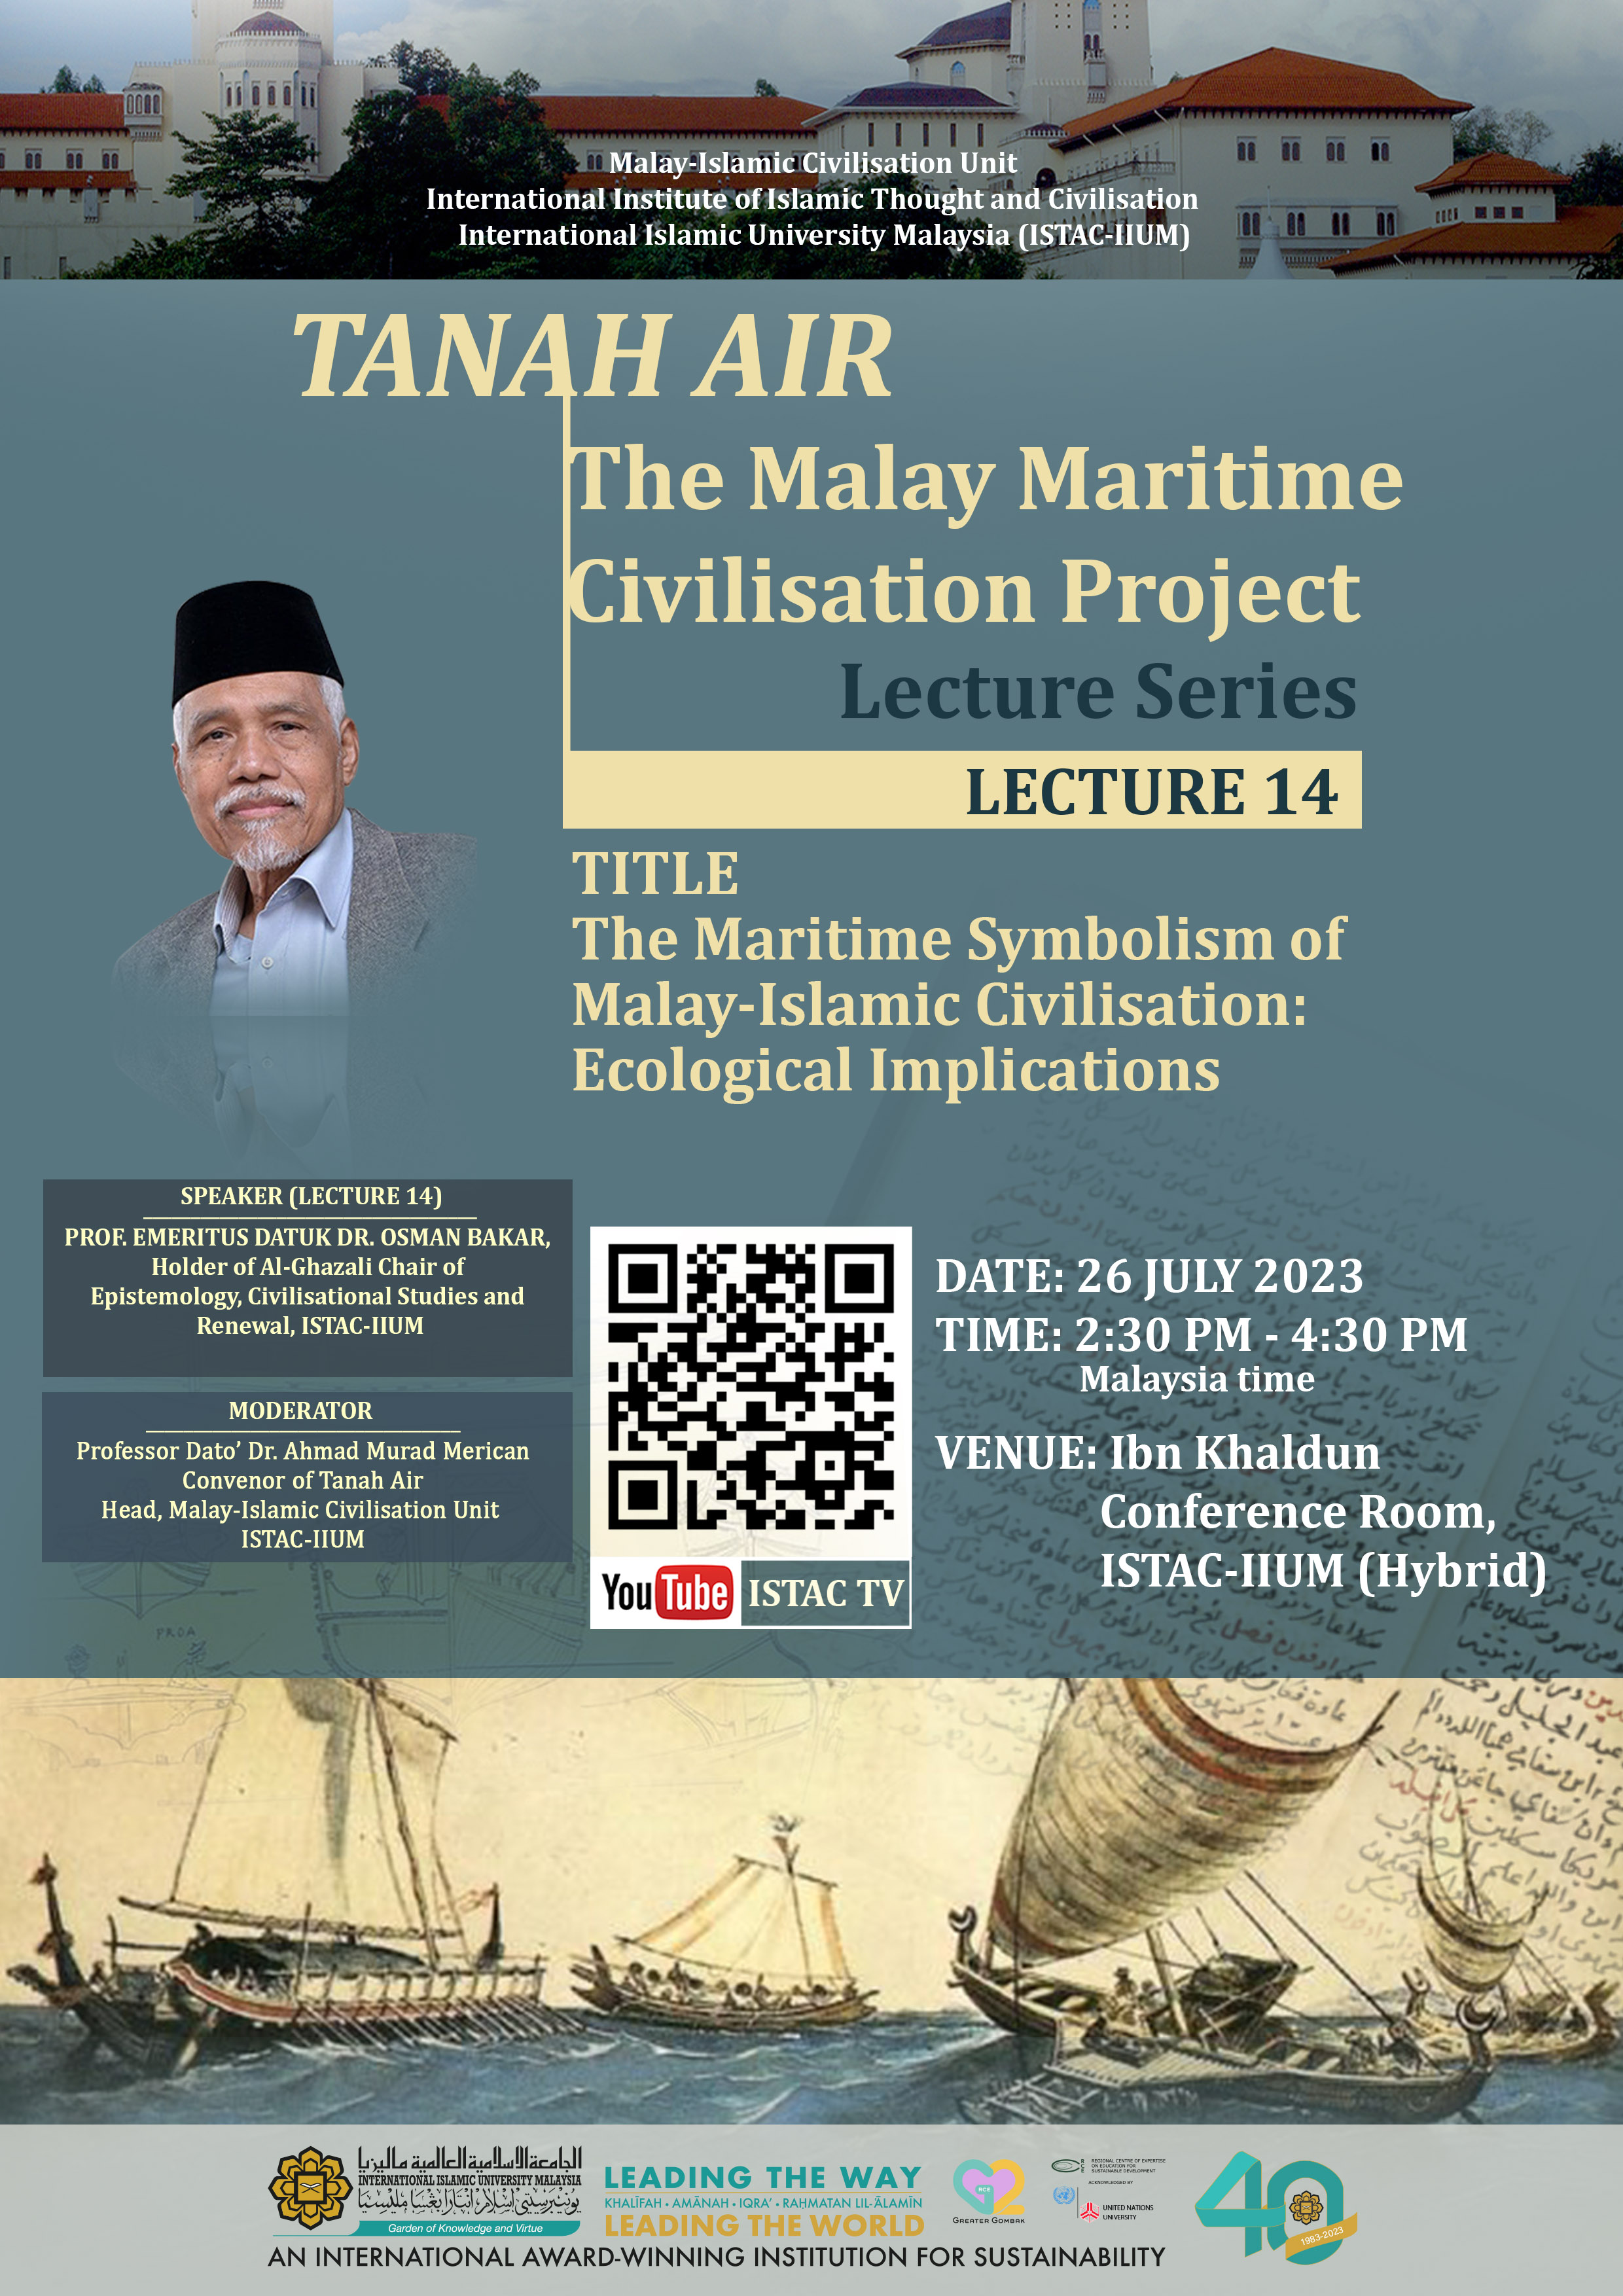 THE FOURTEENTH LECTURE OF TANAH AIR: MALAY MARITIME CIVILISATION PROJECT